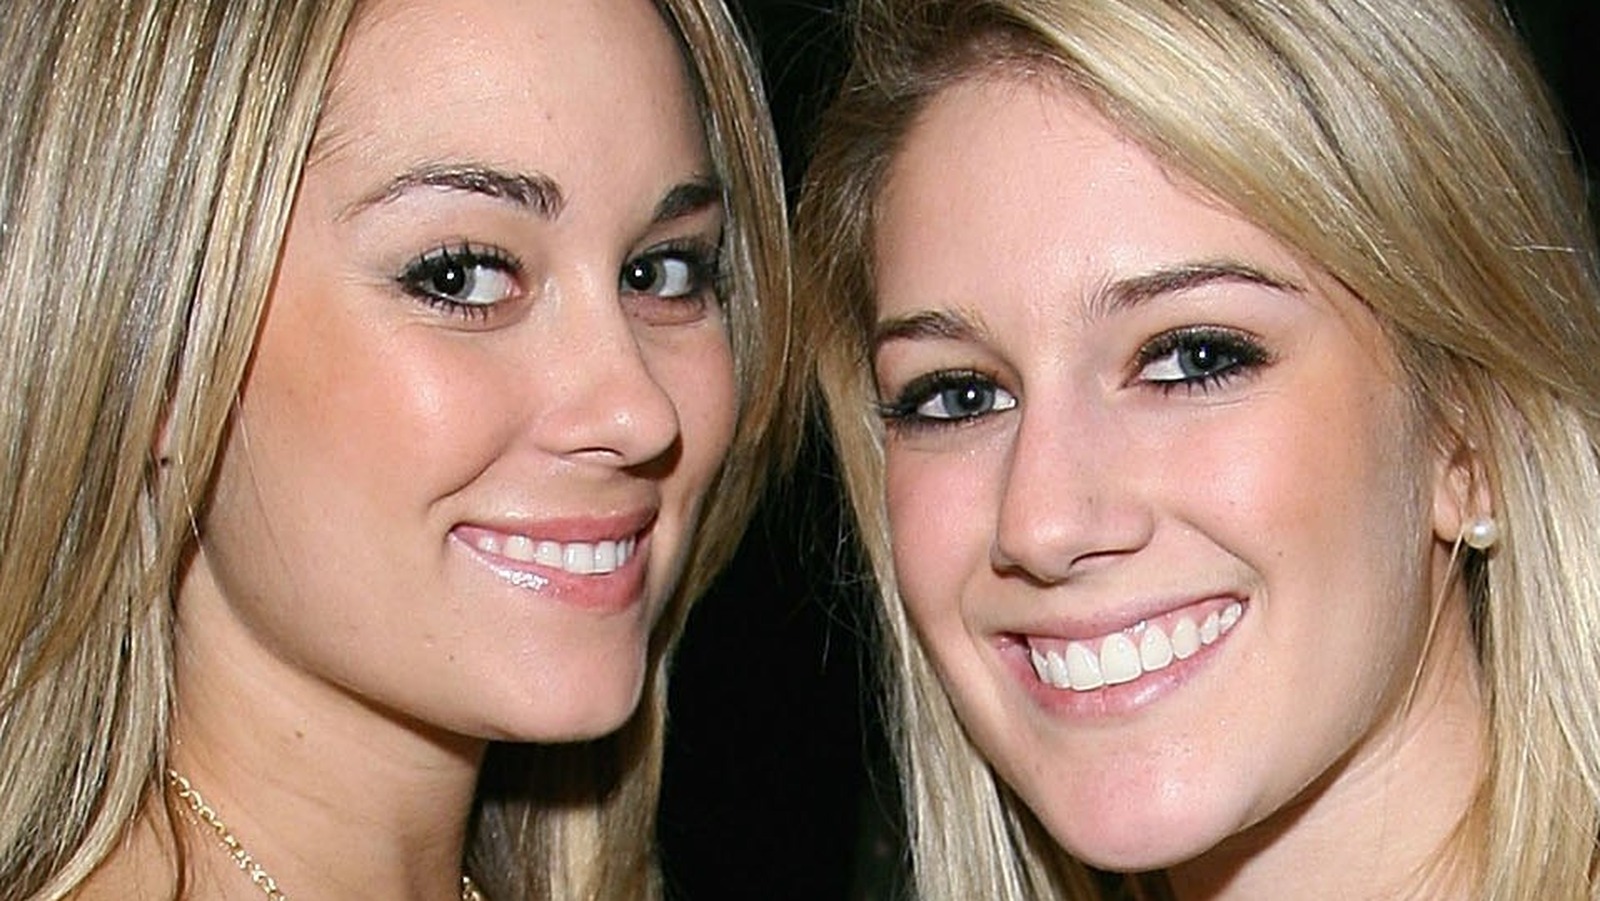 Today in TV History: Lauren Conrad Was the Girl Who Didn't Go to Paris